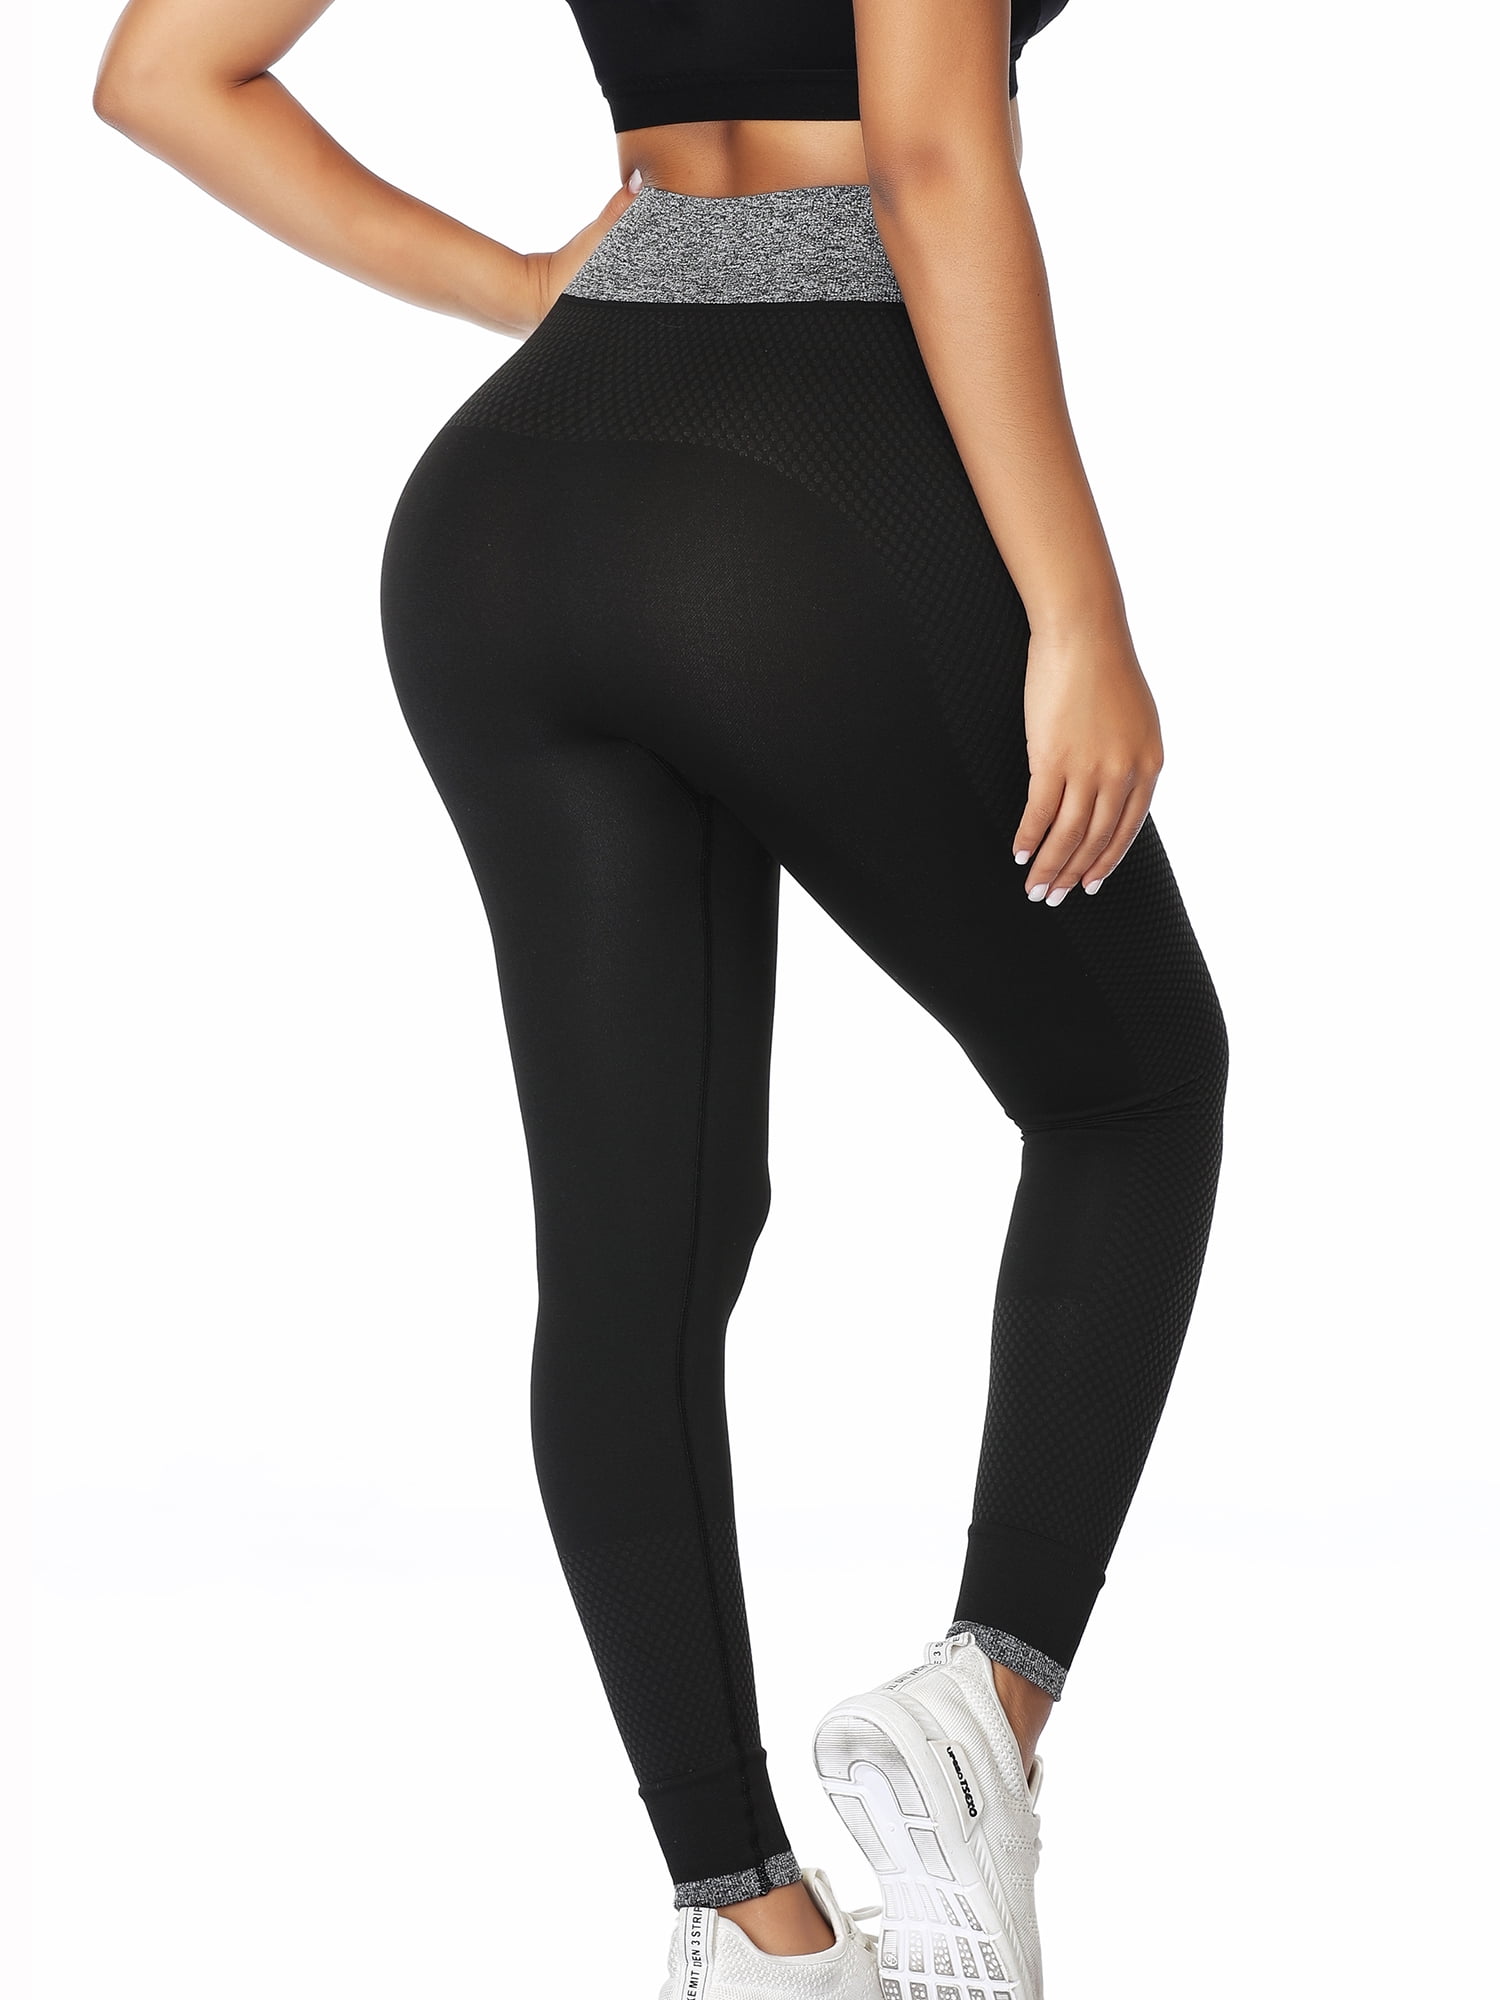 Is That The New Gym Leggings Seamless Tummy Control Compression